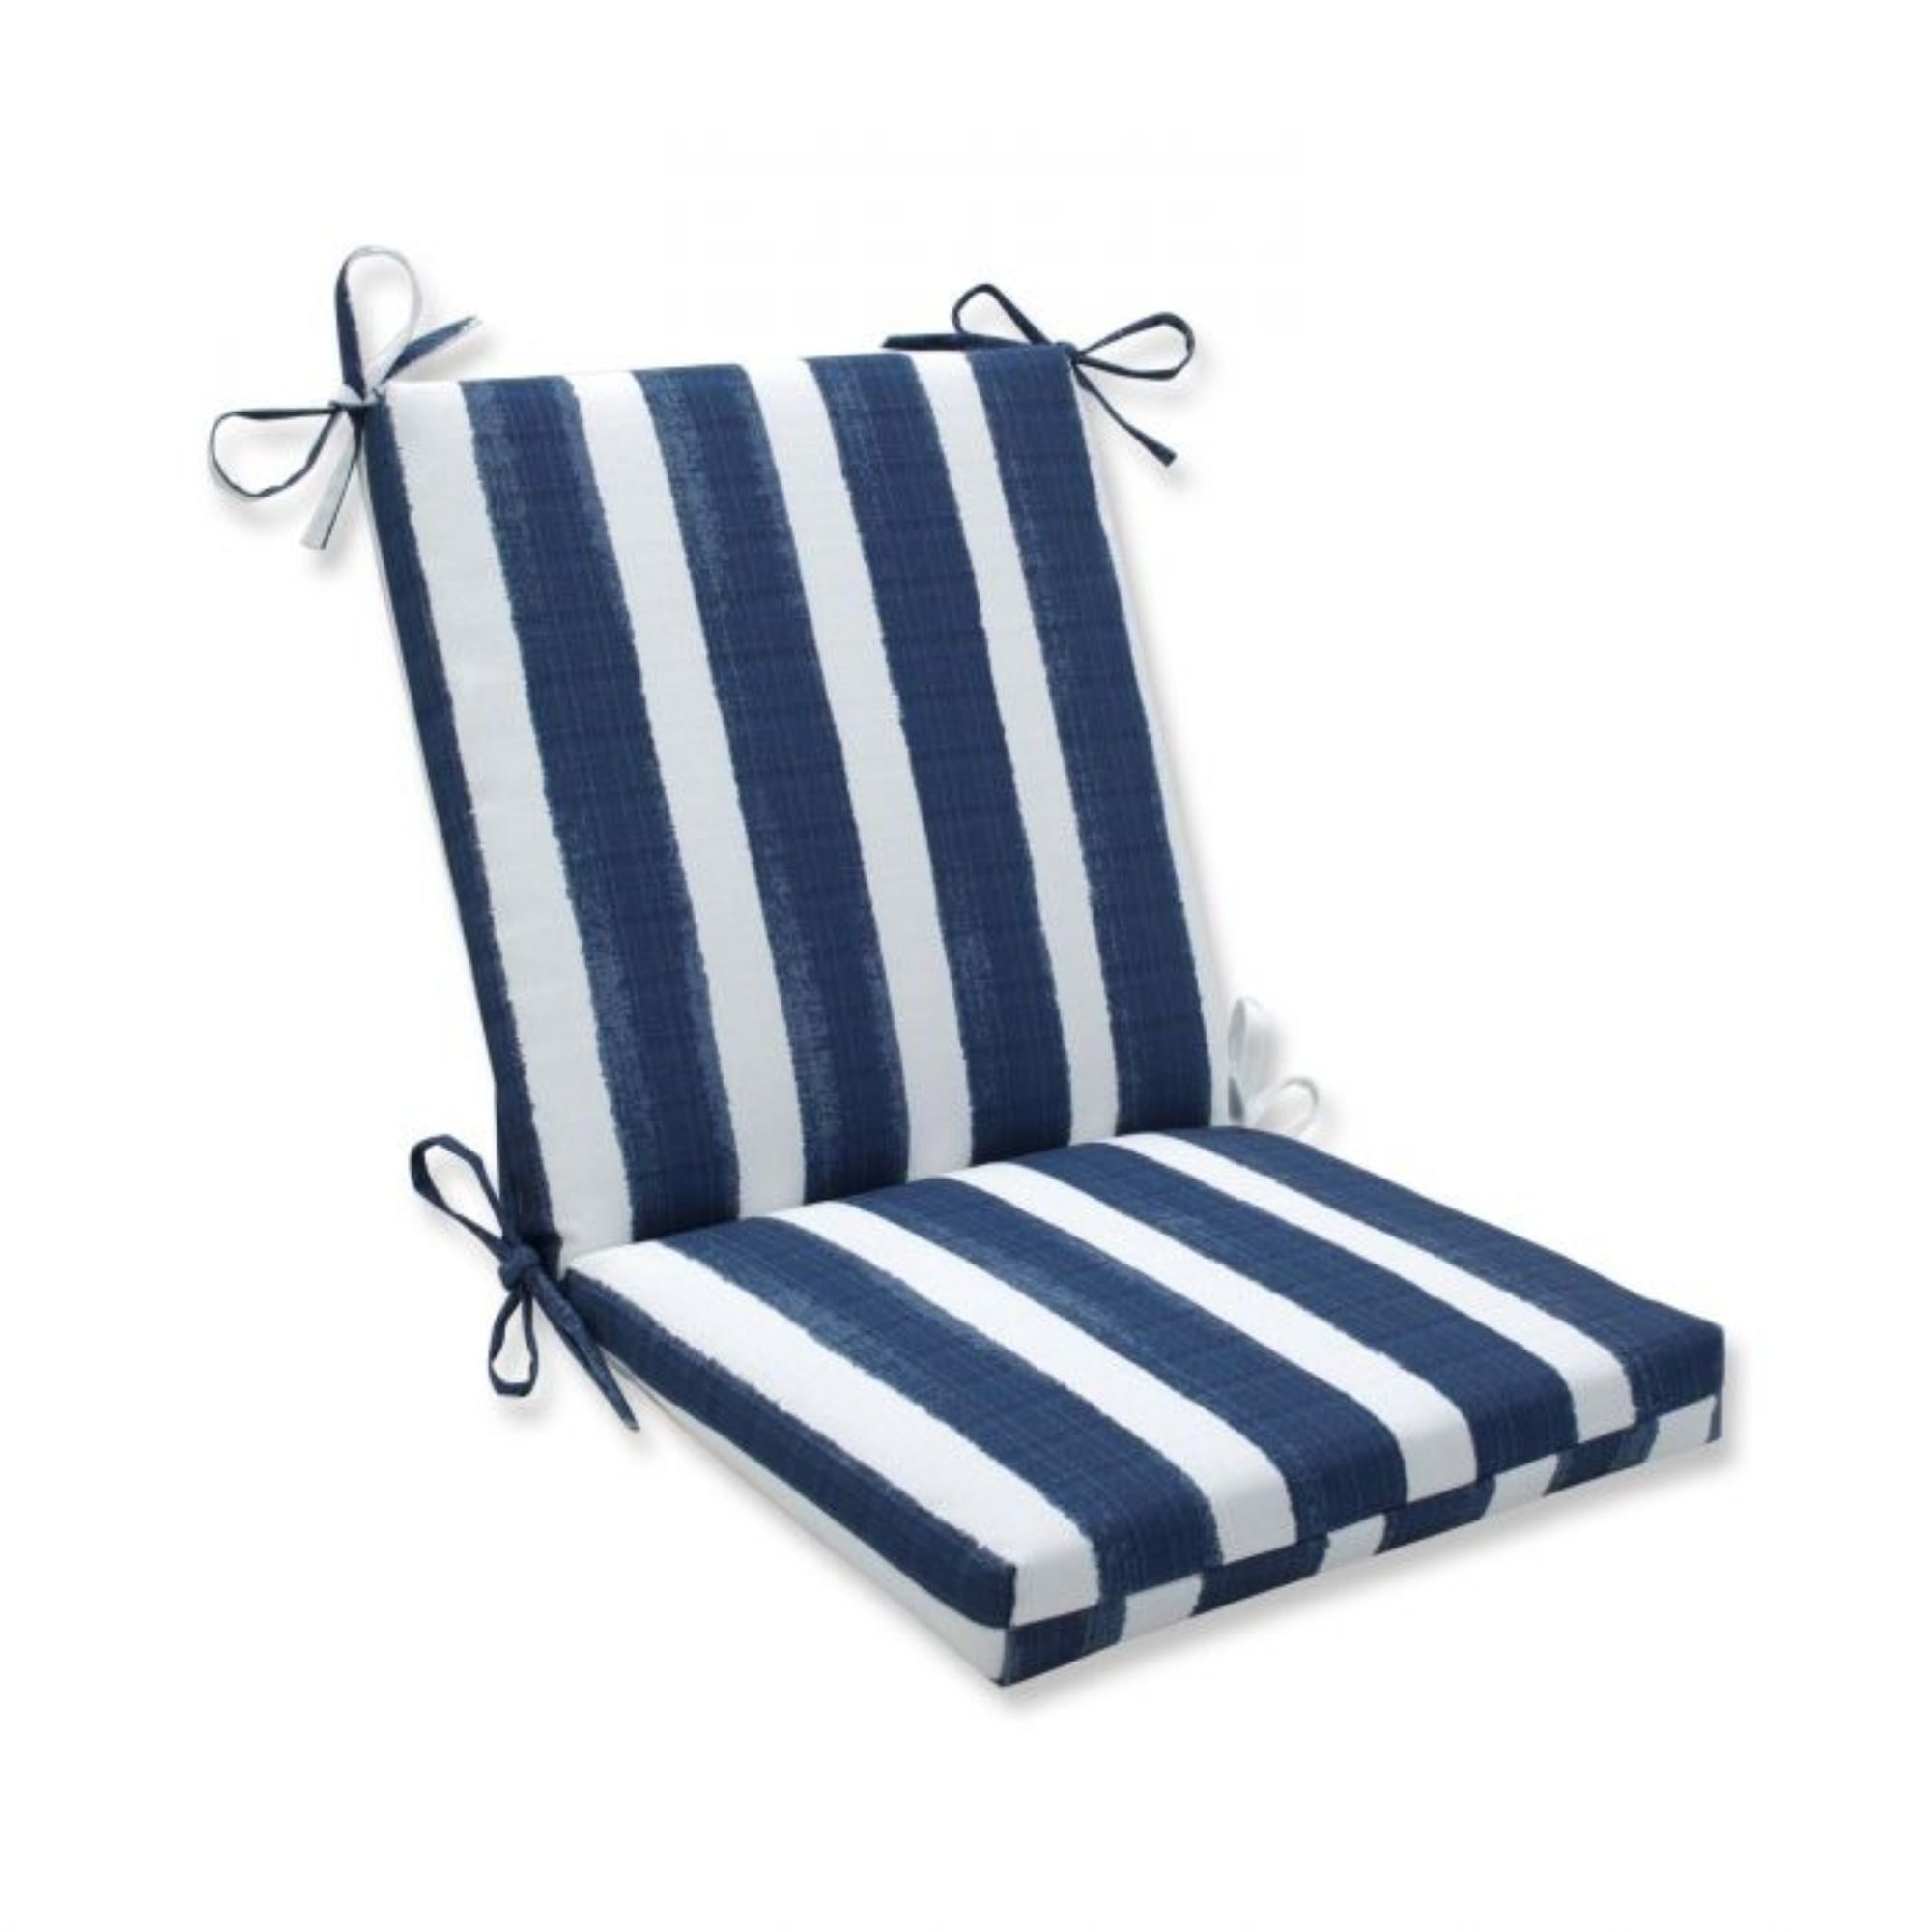 36.5" Navy Blue and White Striped Outdoor Patio Squared Corners Chair Cushion